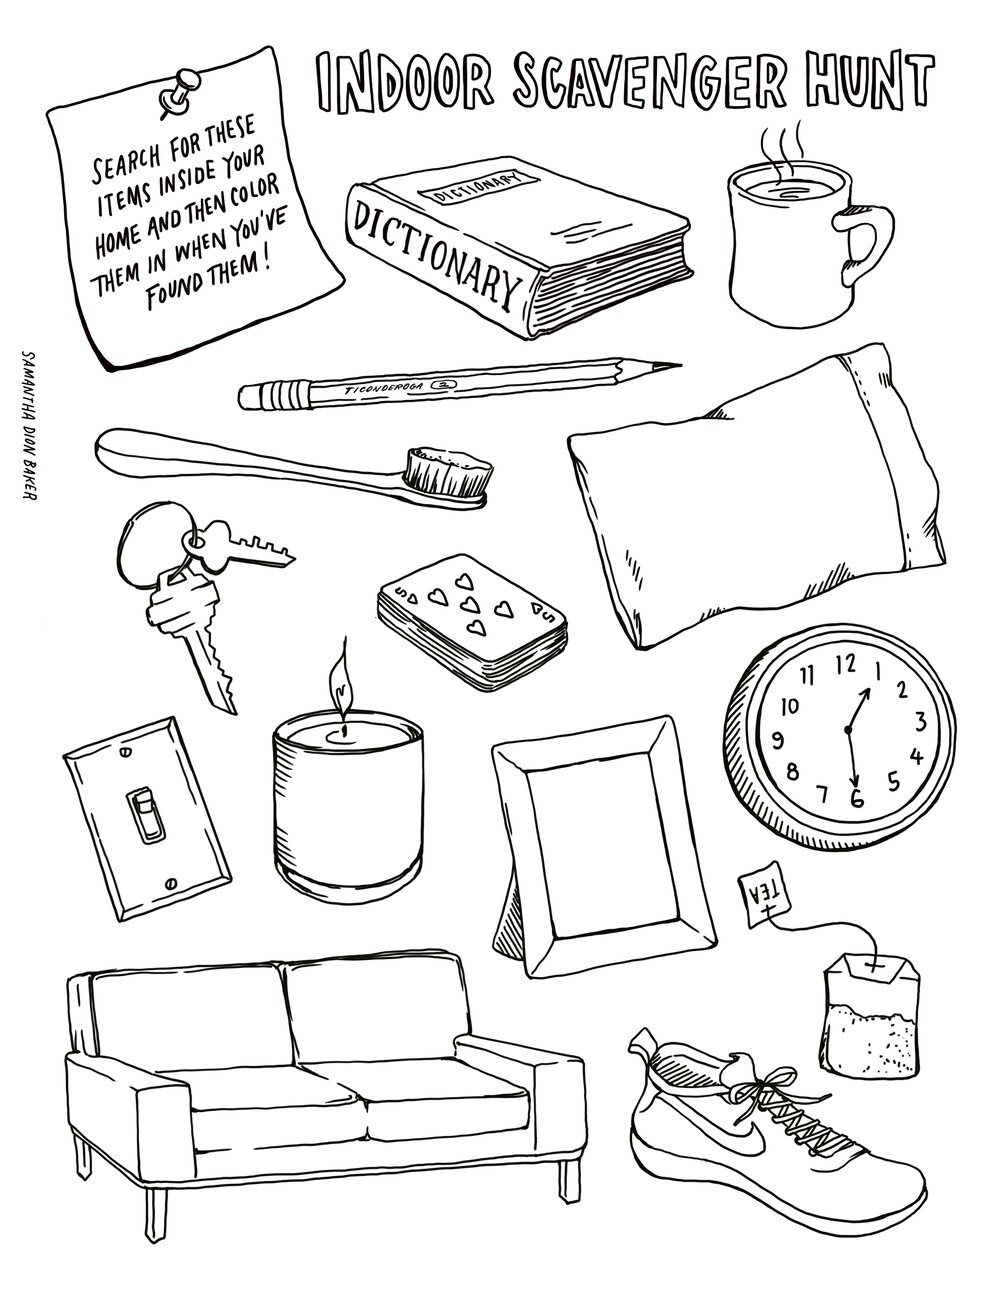 Free Coloring Pages for Adults and Kids   Skillshare Blog